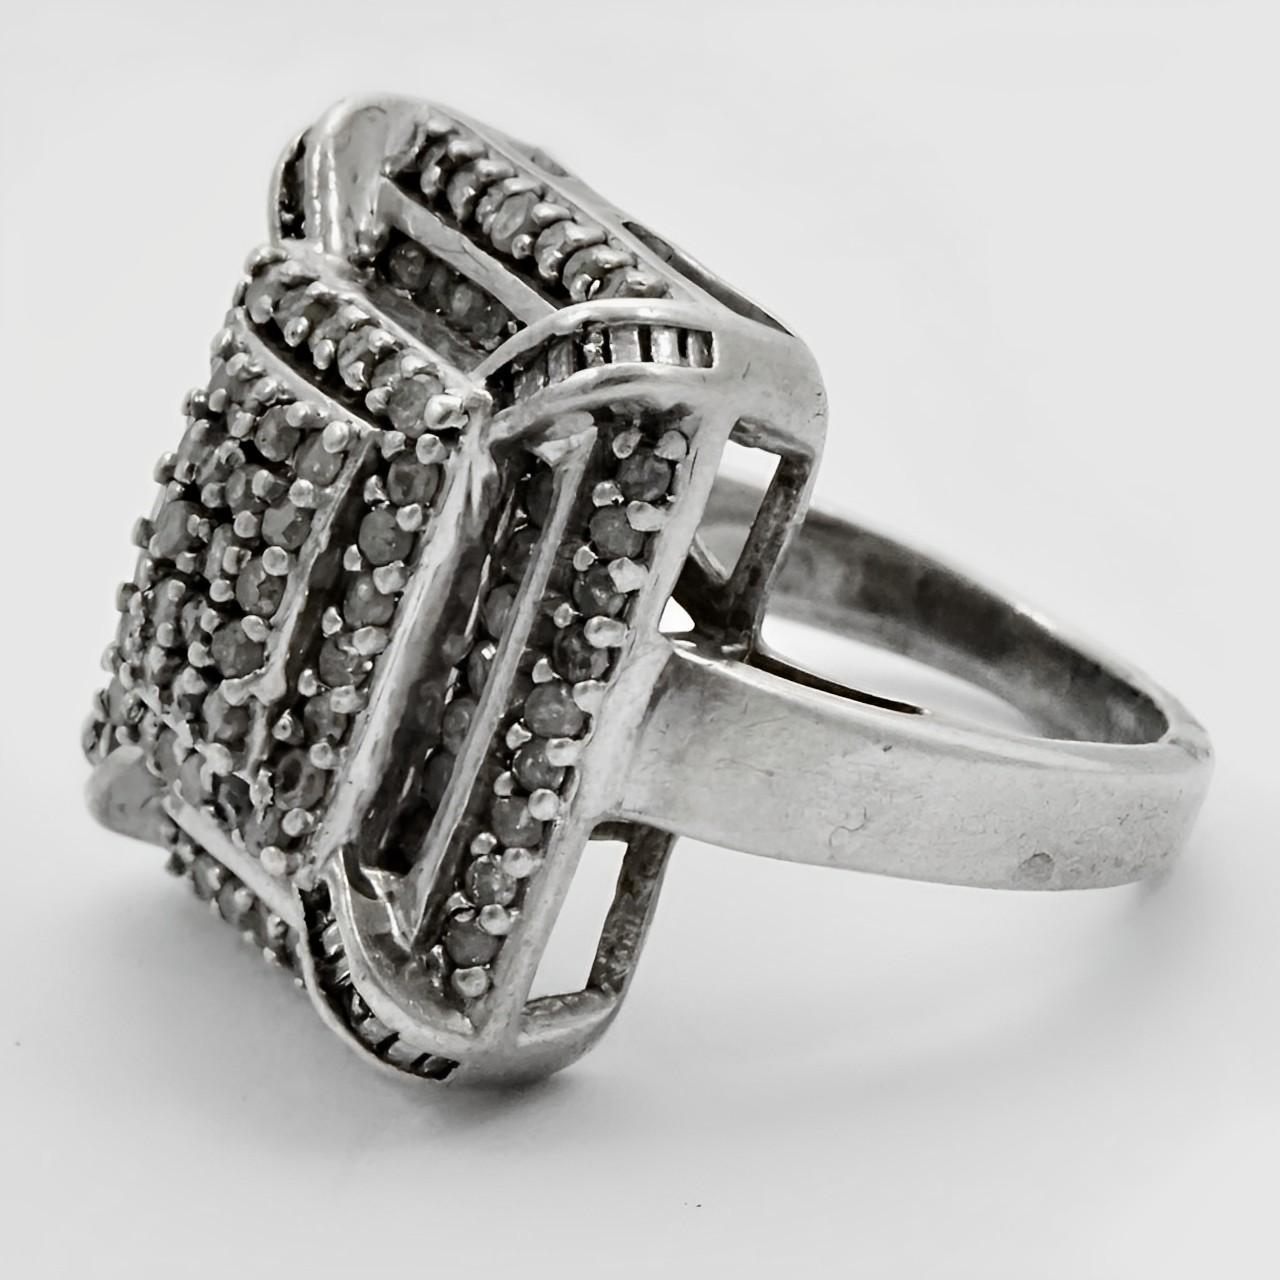 Fabulous Art Deco sterling silver cocktail ring set with two layers of rhinestones. Ring size UK H 1/2, US 4, and measuring inside diameter approximately 1.6 cm / .6 inch. The front measures approximately 1.6 cm / .6 inch by 1.7 cm / .66 inch. The